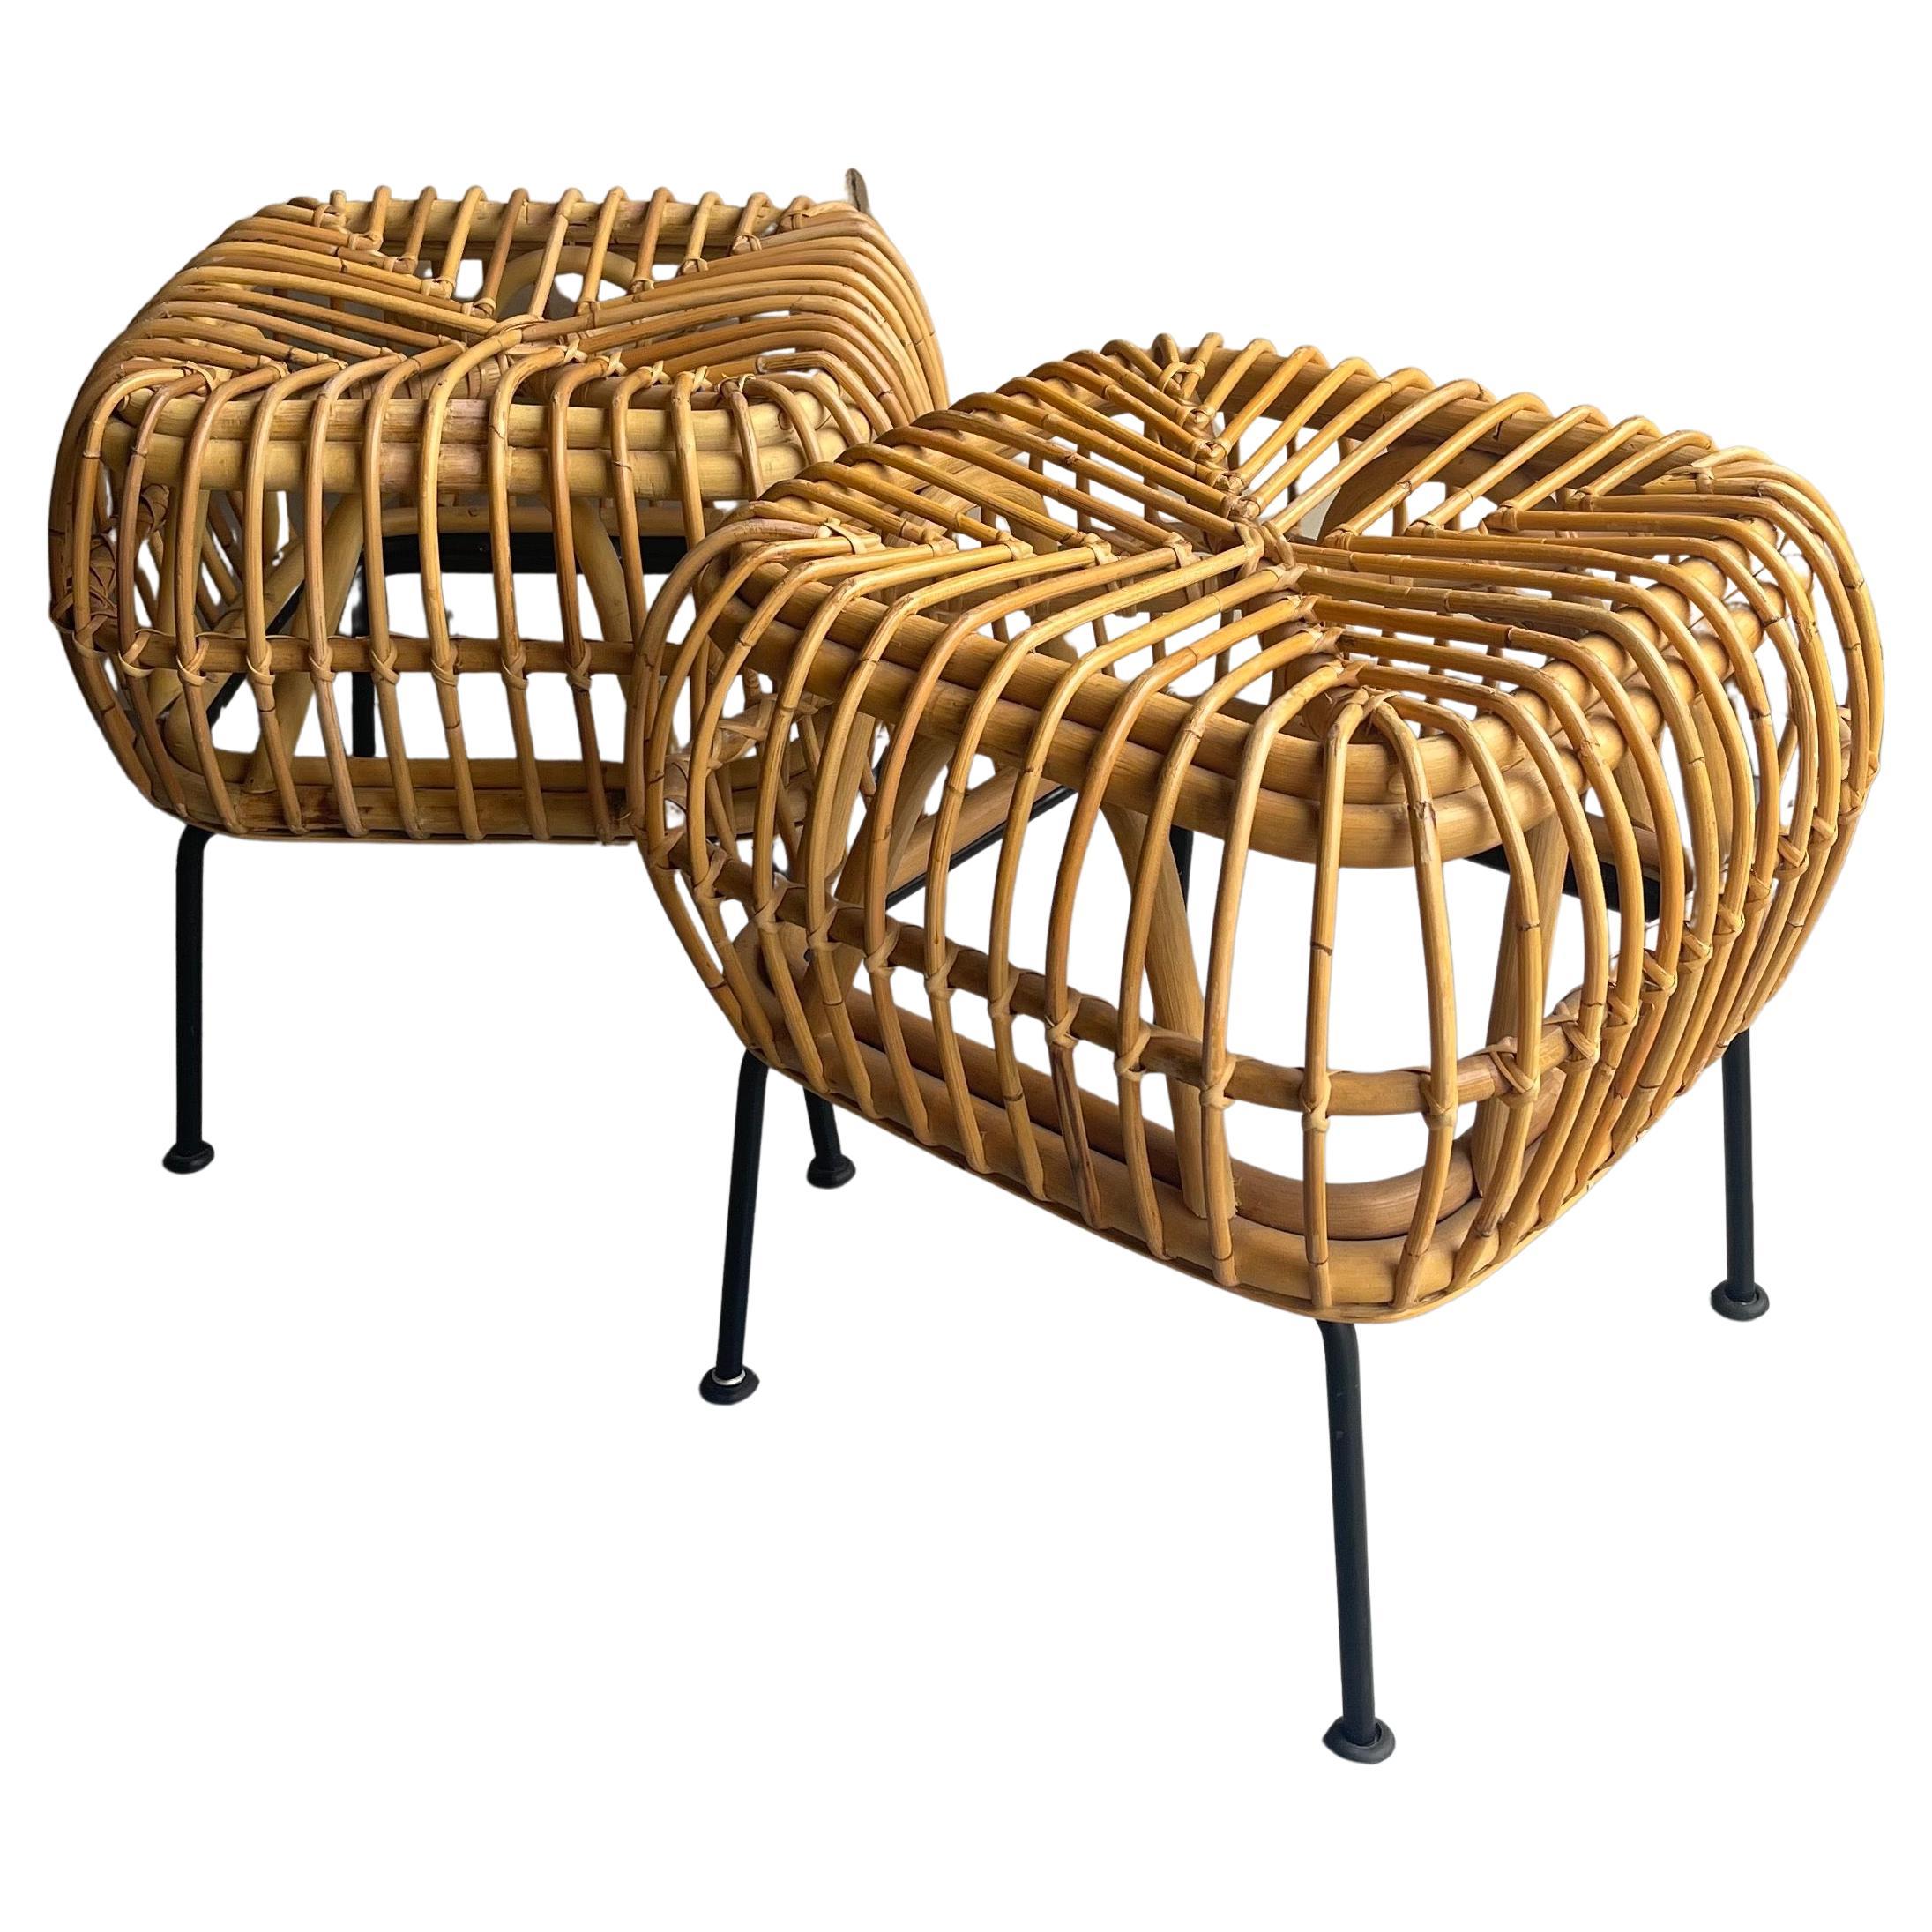 Pair of Forged Iron and Woven Rattan Stools / Benches